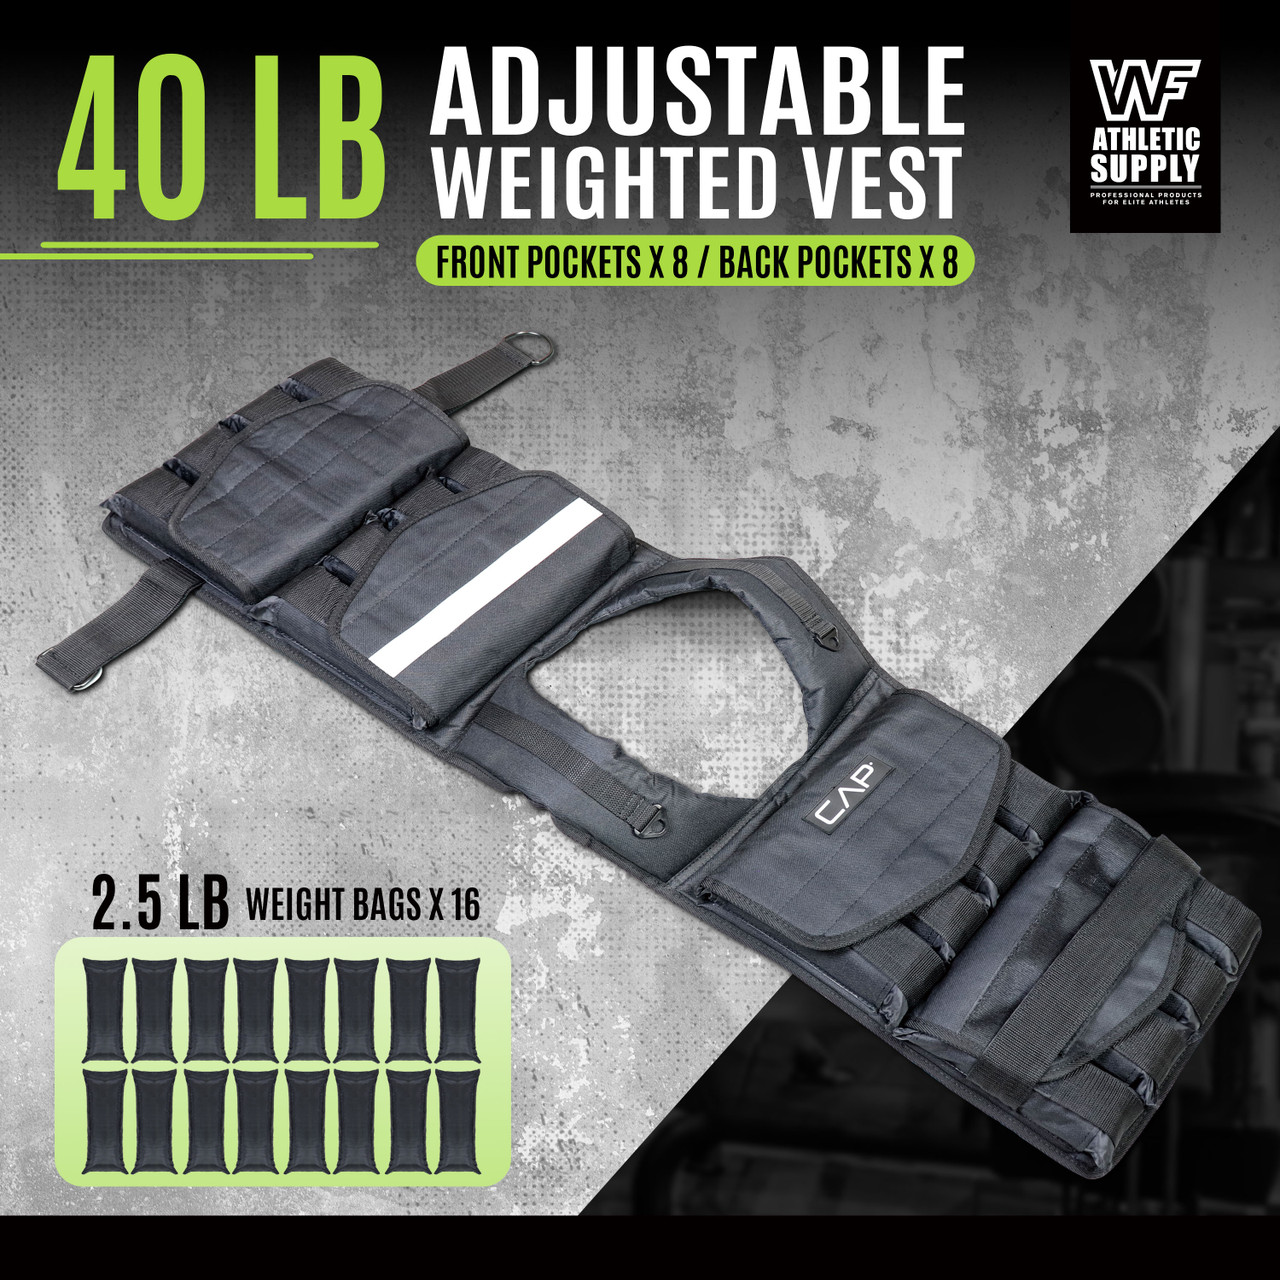 Lv. life 110LB 50KG Adjustable Workout Weighted Vest Exercise Strength  Training Fitness,Made of high-density thickening oxford fabric, durable to  use.Vest 